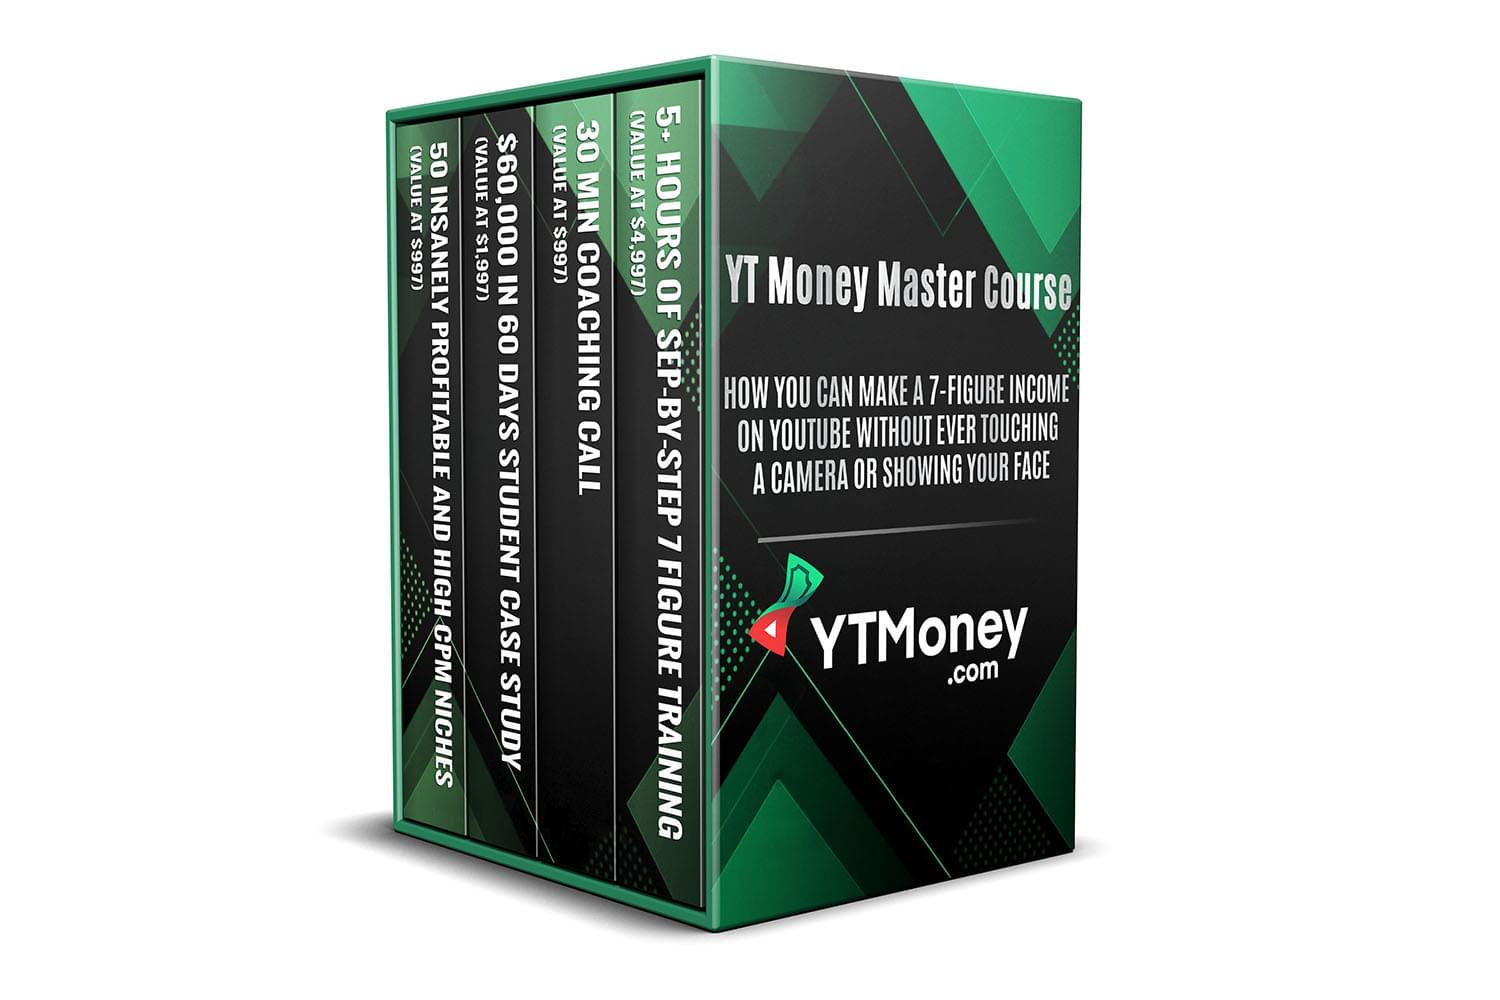 [SUPER HOT SHARE] YouTube Money 2020 Download